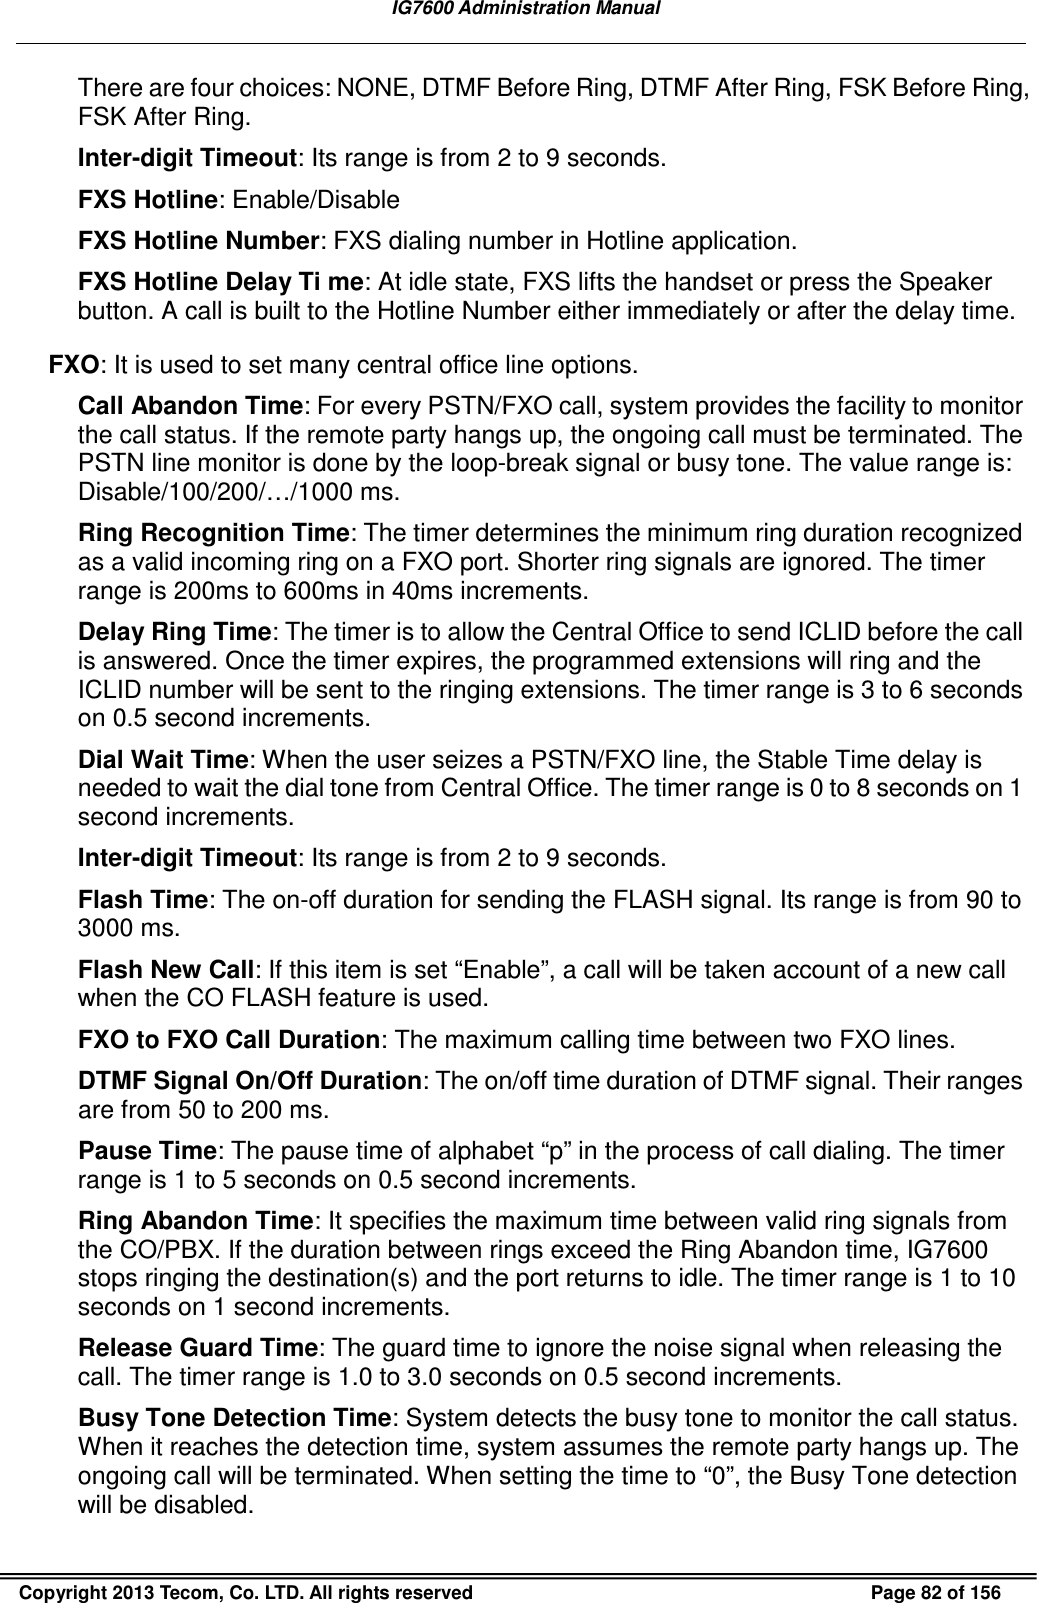   IG7600 Administration Manual  Copyright 2013 Tecom, Co. LTD. All rights reserved  Page 82 of 156 There are four choices: NONE, DTMF Before Ring, DTMF After Ring, FSK Before Ring, FSK After Ring. Inter-digit Timeout: Its range is from 2 to 9 seconds. FXS Hotline: Enable/Disable FXS Hotline Number: FXS dialing number in Hotline application. FXS Hotline Delay Ti me: At idle state, FXS lifts the handset or press the Speaker button. A call is built to the Hotline Number either immediately or after the delay time. FXO: It is used to set many central office line options.  Call Abandon Time: For every PSTN/FXO call, system provides the facility to monitor the call status. If the remote party hangs up, the ongoing call must be terminated. The PSTN line monitor is done by the loop-break signal or busy tone. The value range is: Disable/100/200/…/1000 ms. Ring Recognition Time: The timer determines the minimum ring duration recognized as a valid incoming ring on a FXO port. Shorter ring signals are ignored. The timer range is 200ms to 600ms in 40ms increments. Delay Ring Time: The timer is to allow the Central Office to send ICLID before the call is answered. Once the timer expires, the programmed extensions will ring and the ICLID number will be sent to the ringing extensions. The timer range is 3 to 6 seconds on 0.5 second increments. Dial Wait Time: When the user seizes a PSTN/FXO line, the Stable Time delay is needed to wait the dial tone from Central Office. The timer range is 0 to 8 seconds on 1 second increments. Inter-digit Timeout: Its range is from 2 to 9 seconds. Flash Time: The on-off duration for sending the FLASH signal. Its range is from 90 to 3000 ms. Flash New Call: If this item is set “Enable”, a call will be taken account of a new call when the CO FLASH feature is used.   FXO to FXO Call Duration: The maximum calling time between two FXO lines. DTMF Signal On/Off Duration: The on/off time duration of DTMF signal. Their ranges are from 50 to 200 ms. Pause Time: The pause time of alphabet “p” in the process of call dialing. The timer range is 1 to 5 seconds on 0.5 second increments. Ring Abandon Time: It specifies the maximum time between valid ring signals from the CO/PBX. If the duration between rings exceed the Ring Abandon time, IG7600 stops ringing the destination(s) and the port returns to idle. The timer range is 1 to 10 seconds on 1 second increments. Release Guard Time: The guard time to ignore the noise signal when releasing the call. The timer range is 1.0 to 3.0 seconds on 0.5 second increments. Busy Tone Detection Time: System detects the busy tone to monitor the call status. When it reaches the detection time, system assumes the remote party hangs up. The ongoing call will be terminated. When setting the time to “0”, the Busy Tone detection will be disabled. 